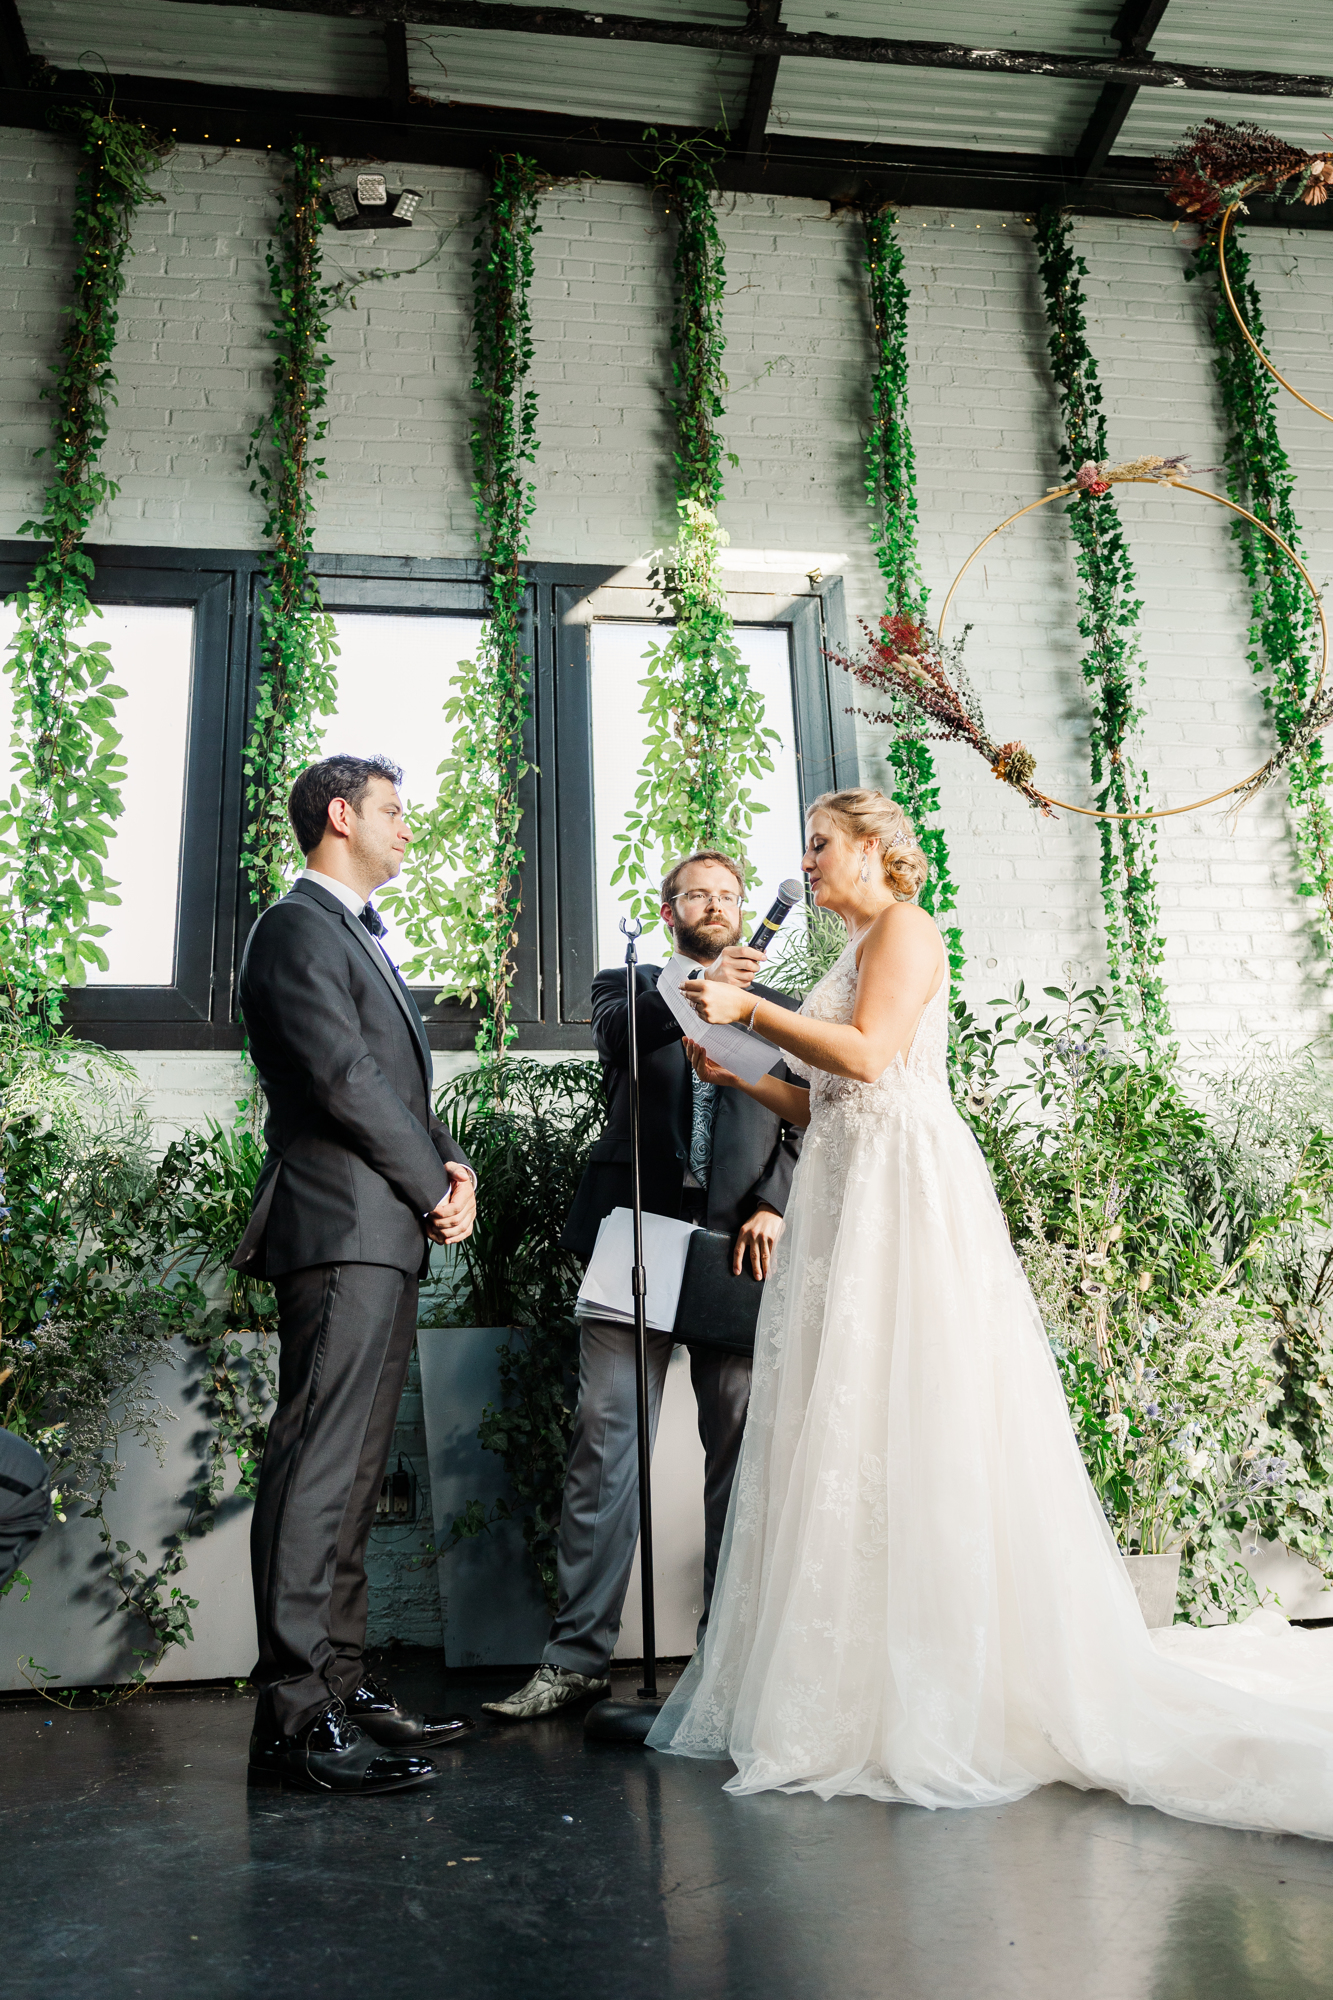 Marvelous NYC Event Venues for Winter Weddings